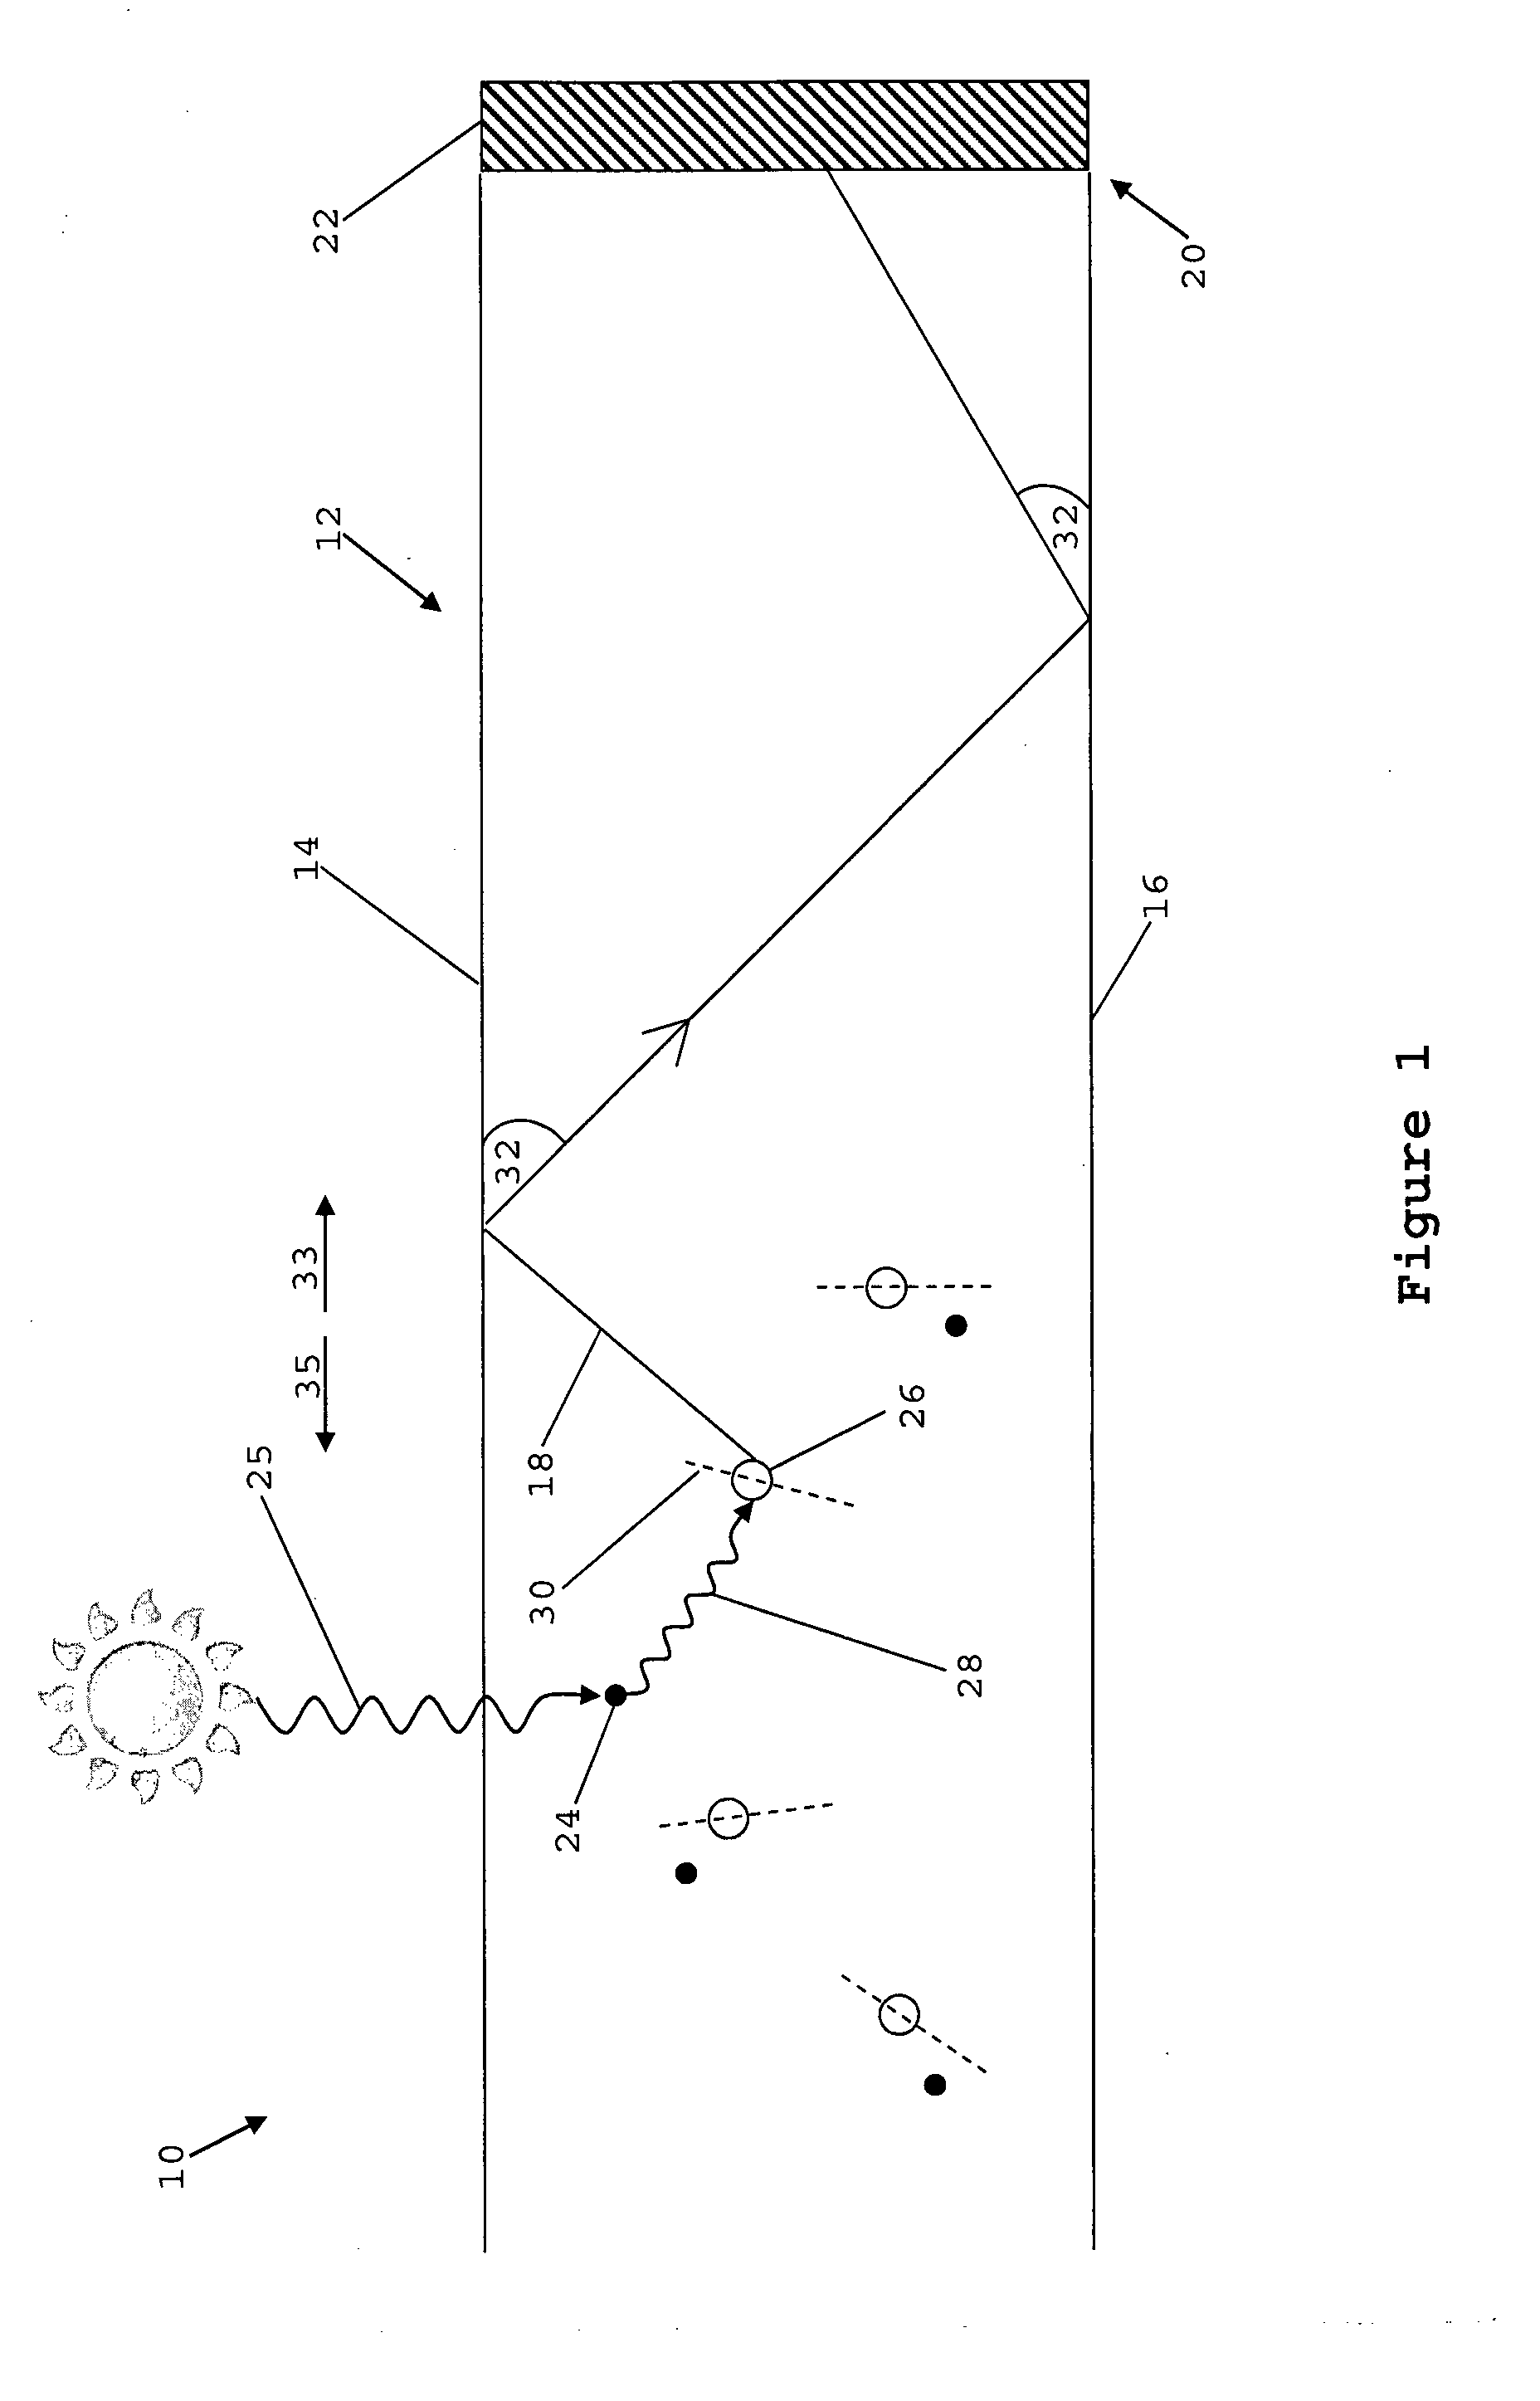 Luminescent solar concentrator and method for making the same,